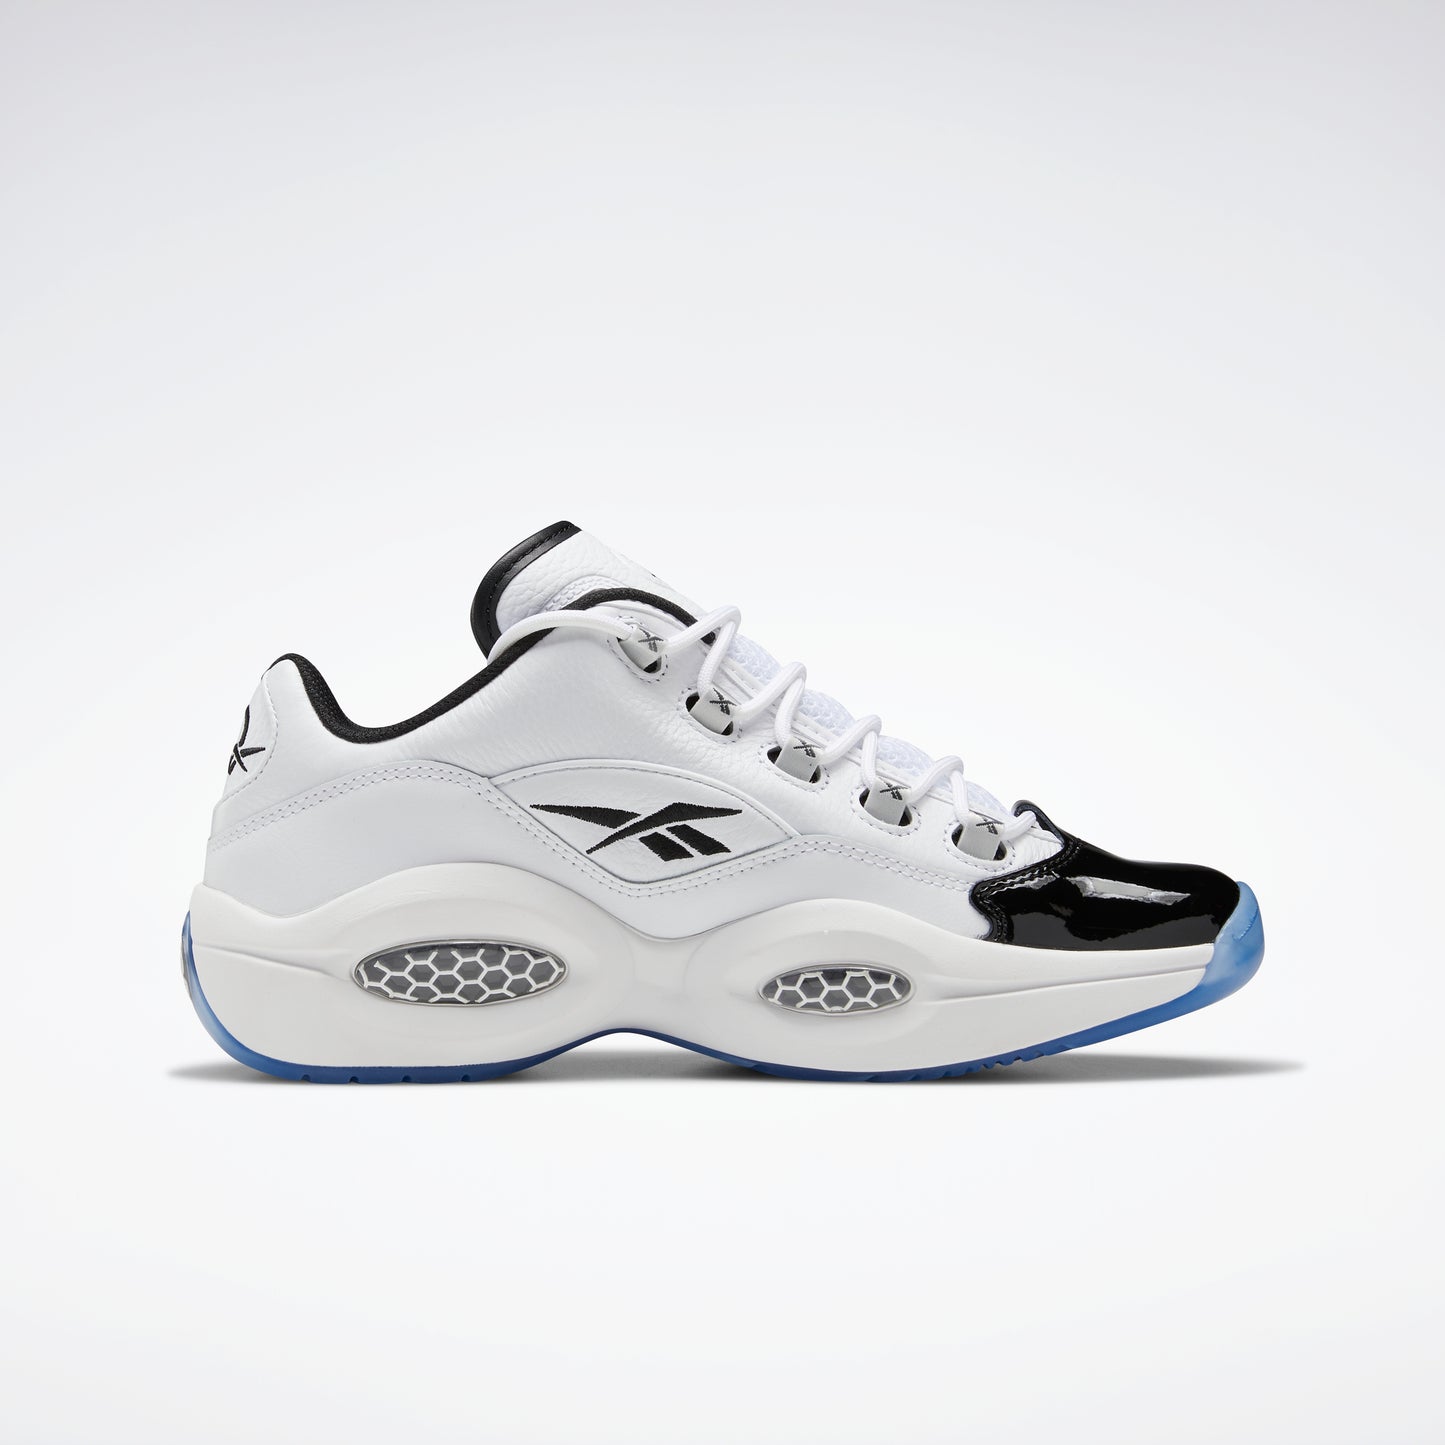 Chaussures Reebok Hommes Question Low Chaussures Ftwwht/Cblack/Ftwwht